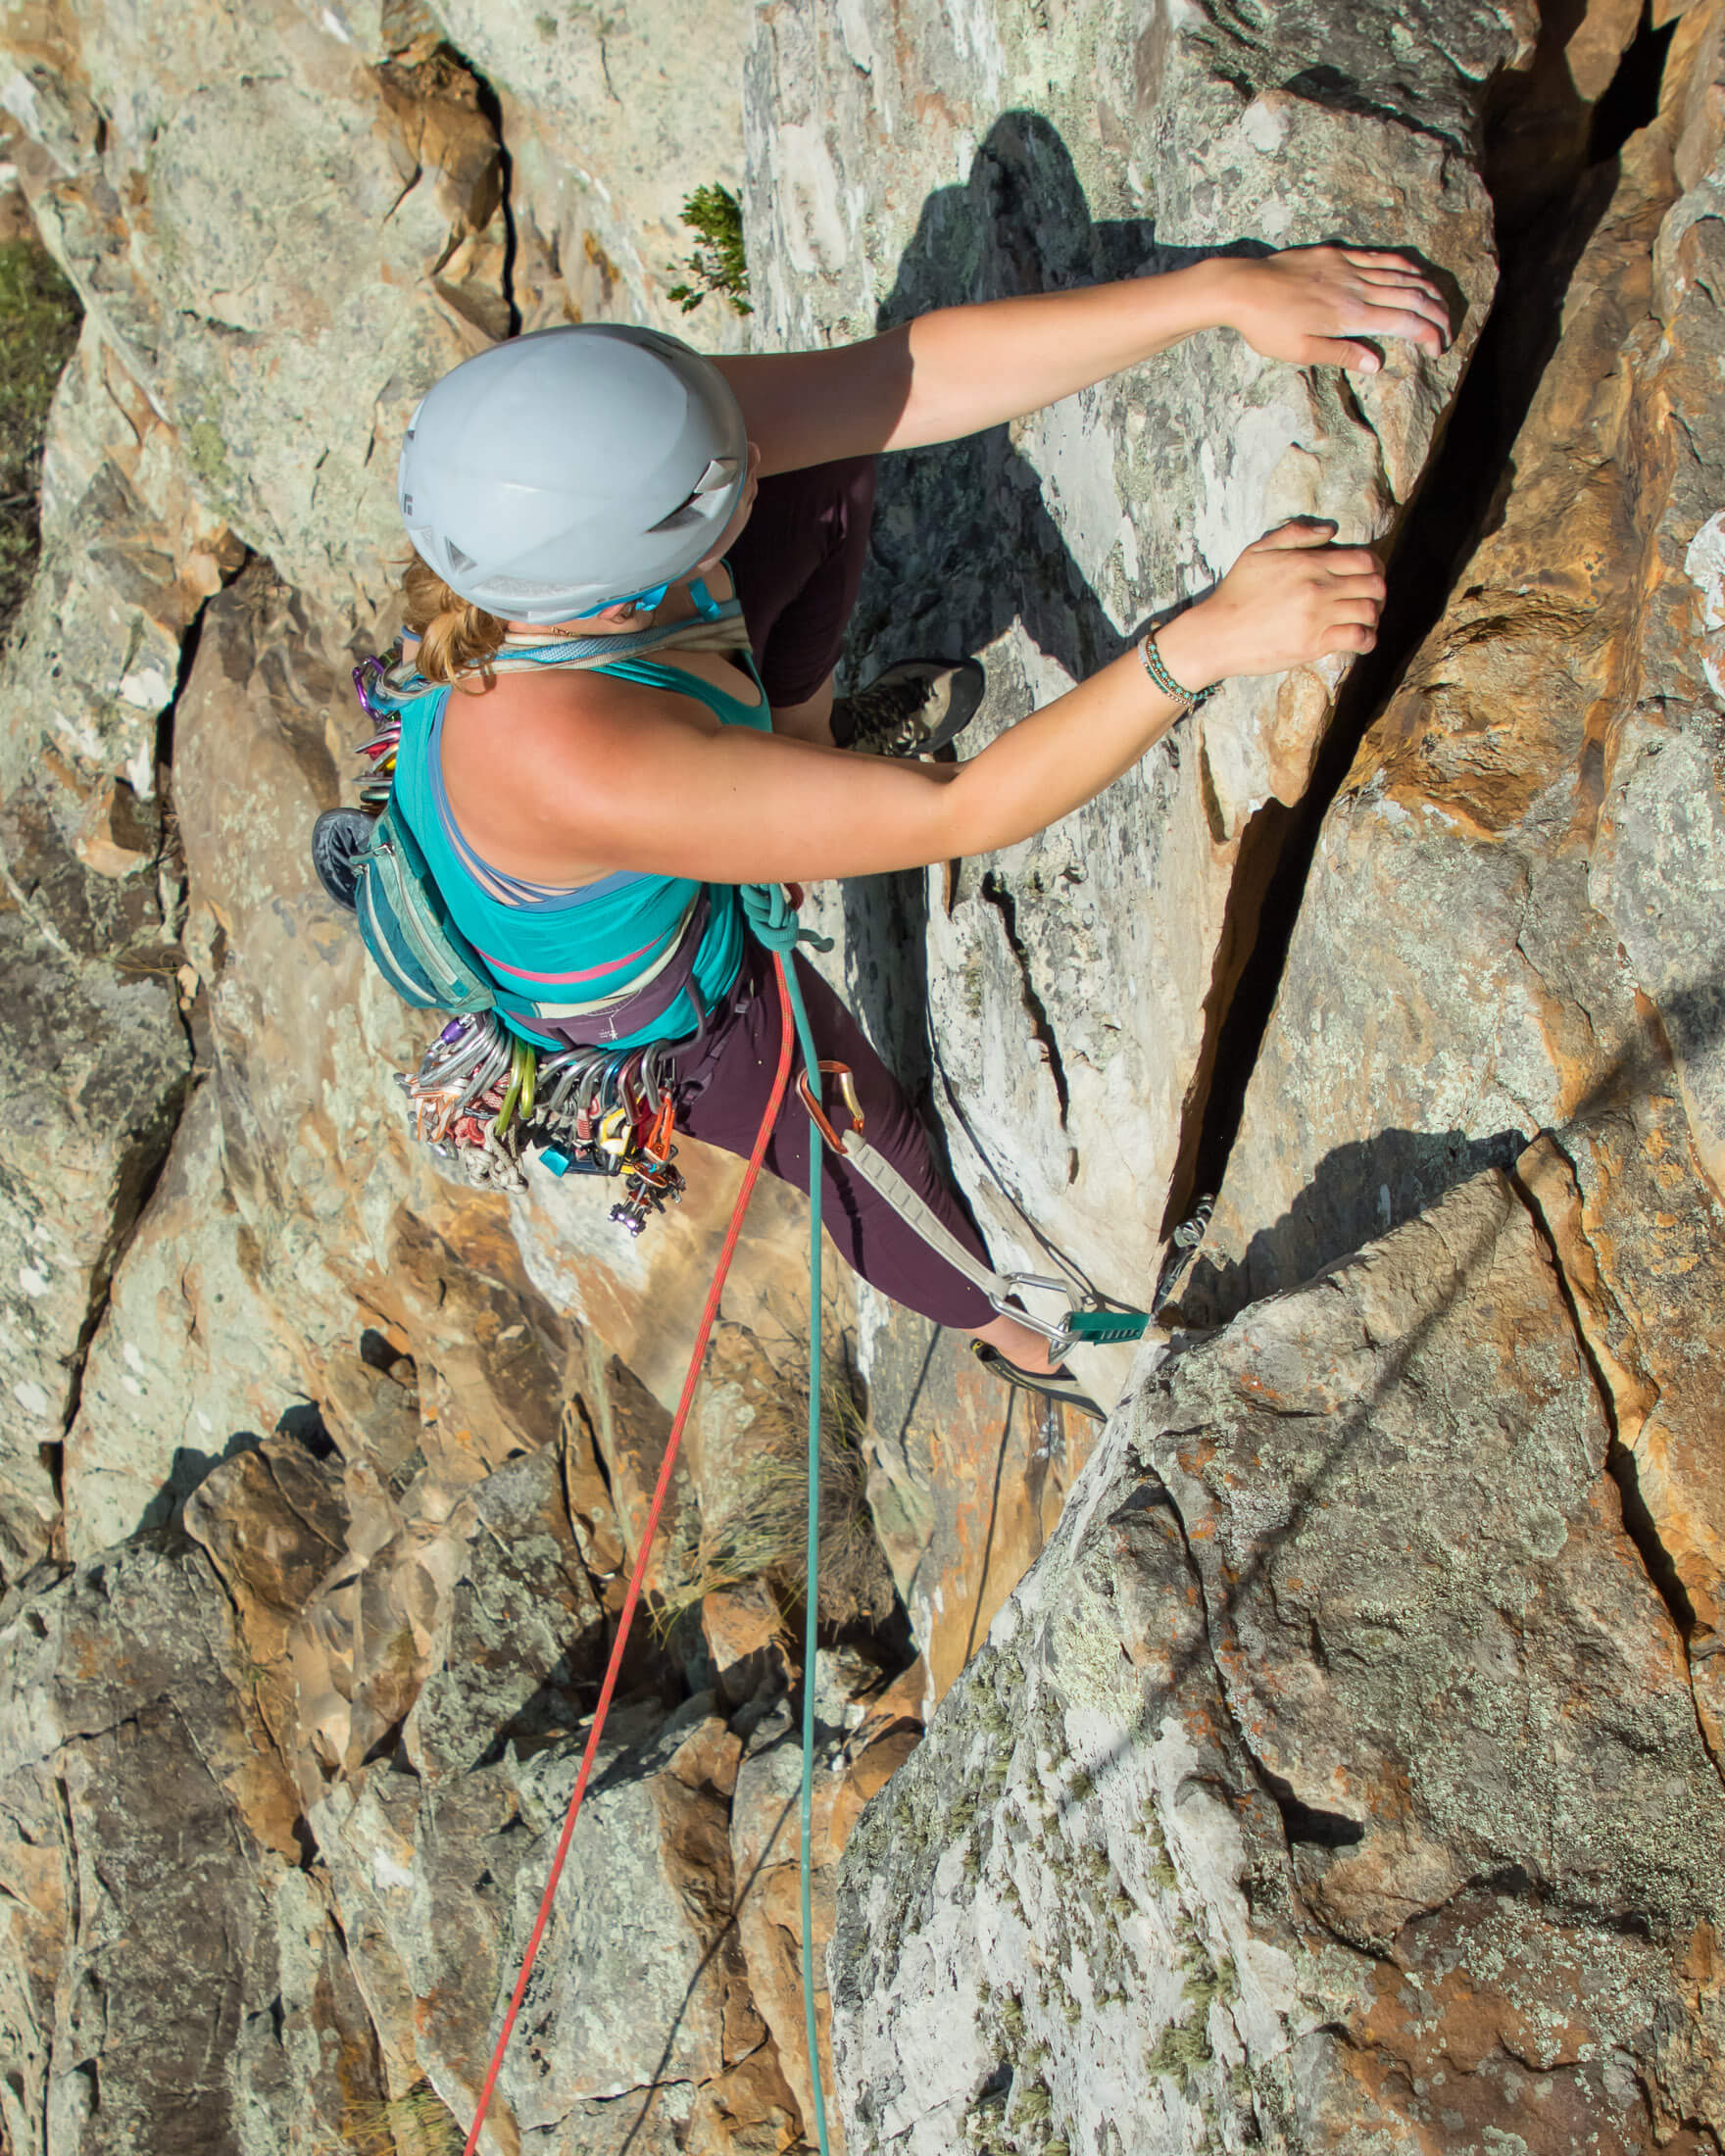 climber leading trad route using double ropes